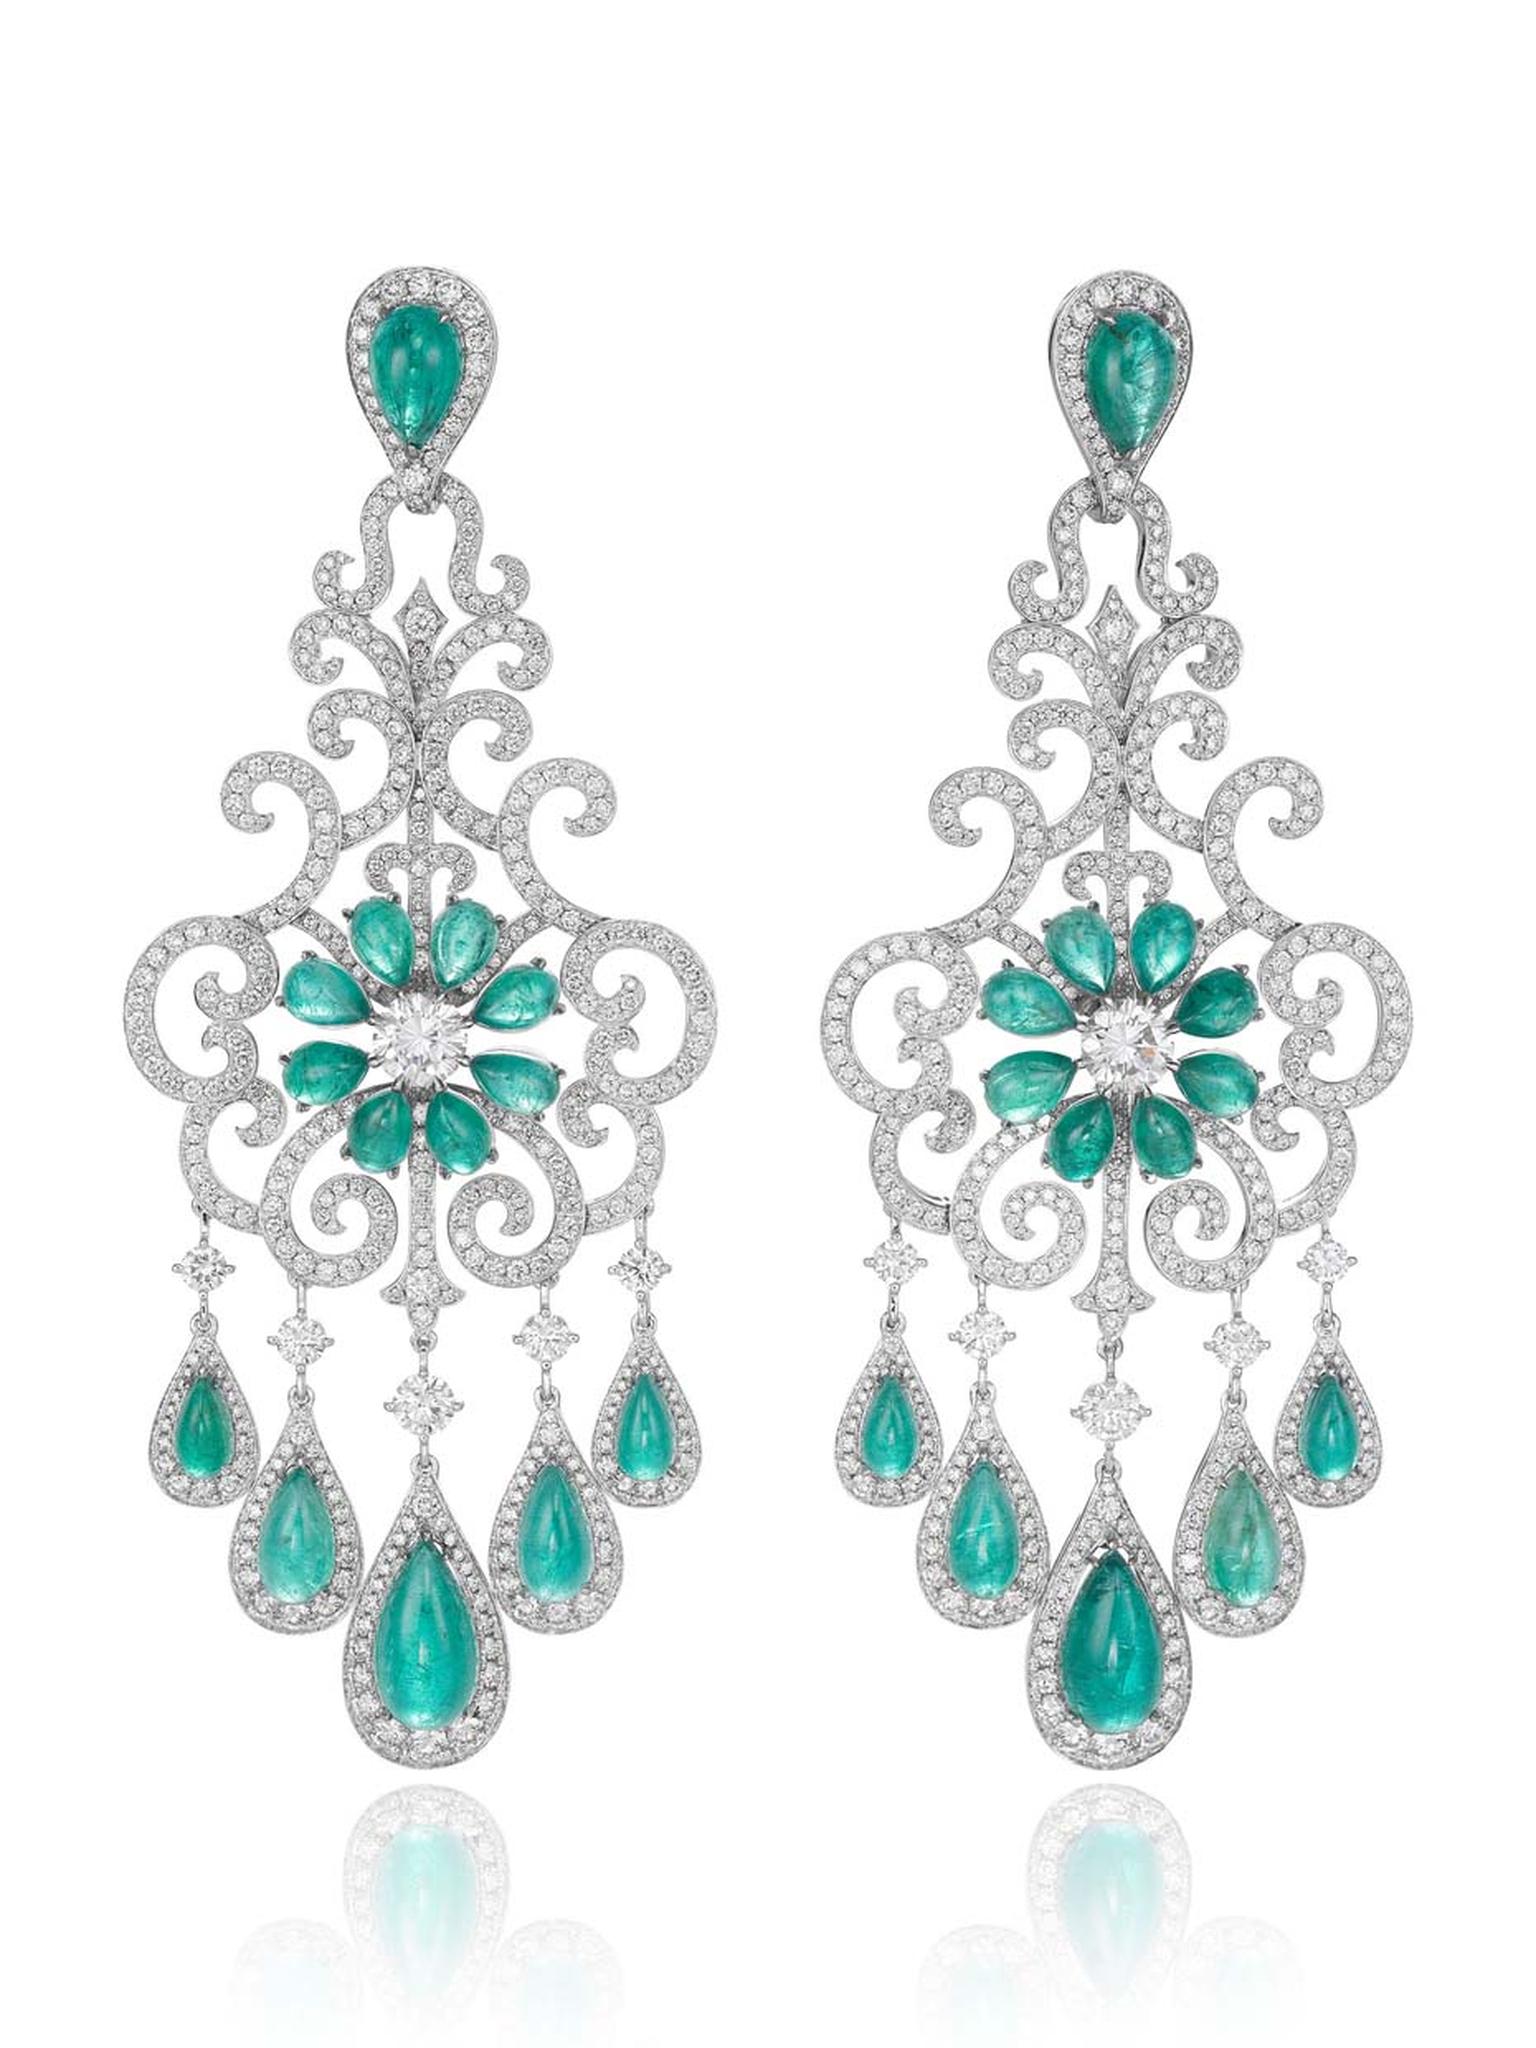 One-of-a-kind Chopard Paraiba tourmaline earrings with diamonds from the 2015 Red Carpet collection.